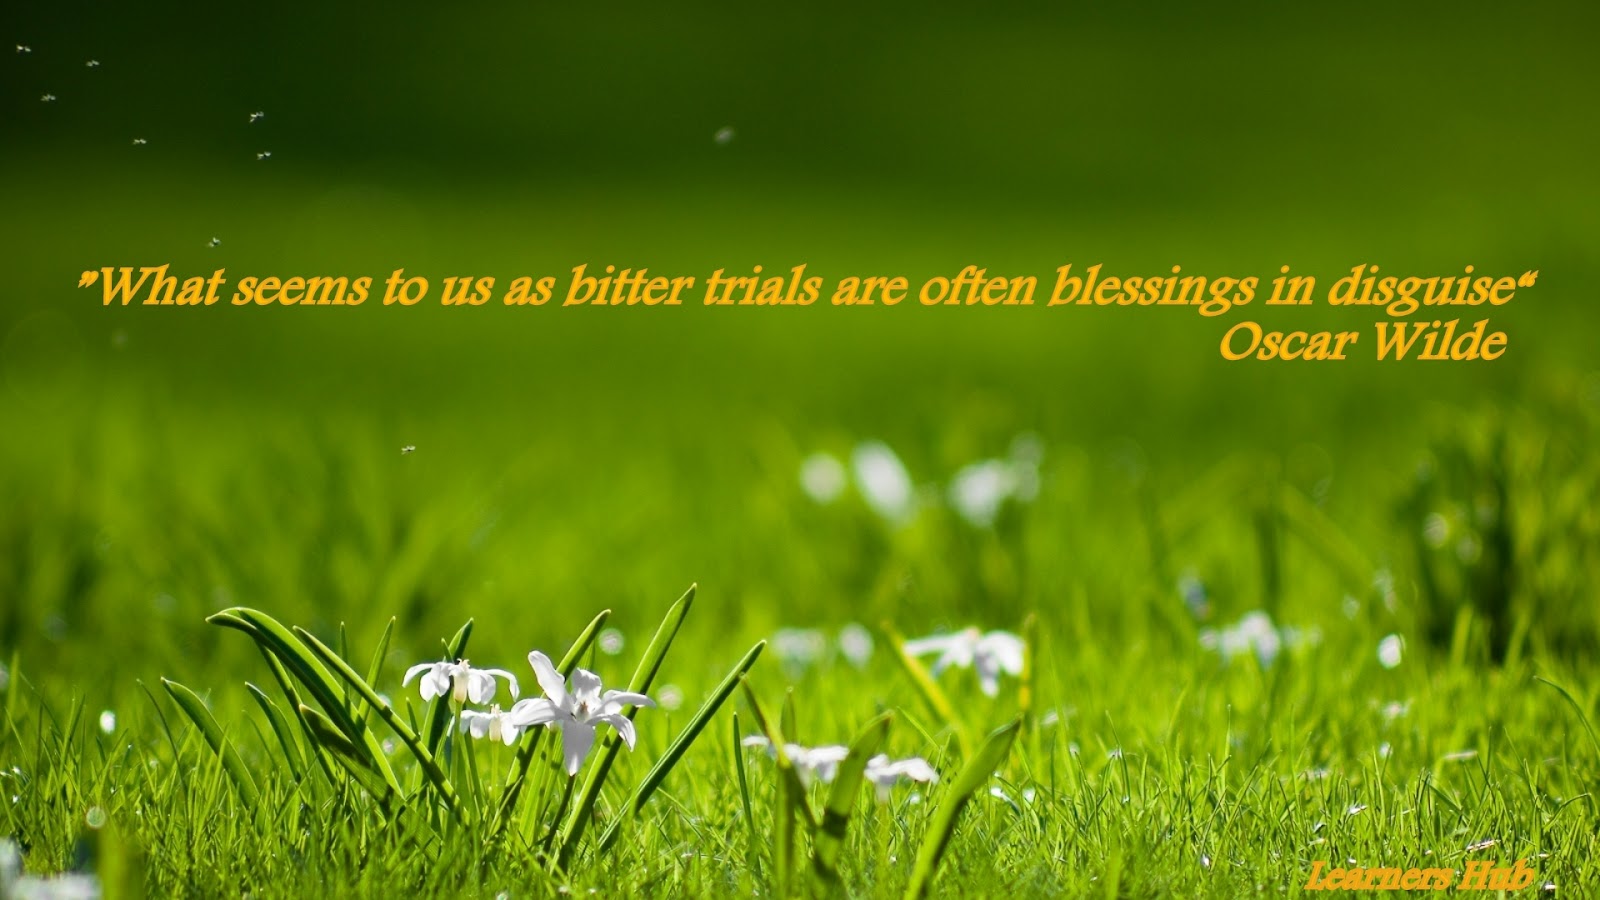 All good quotes: BLESSINGS